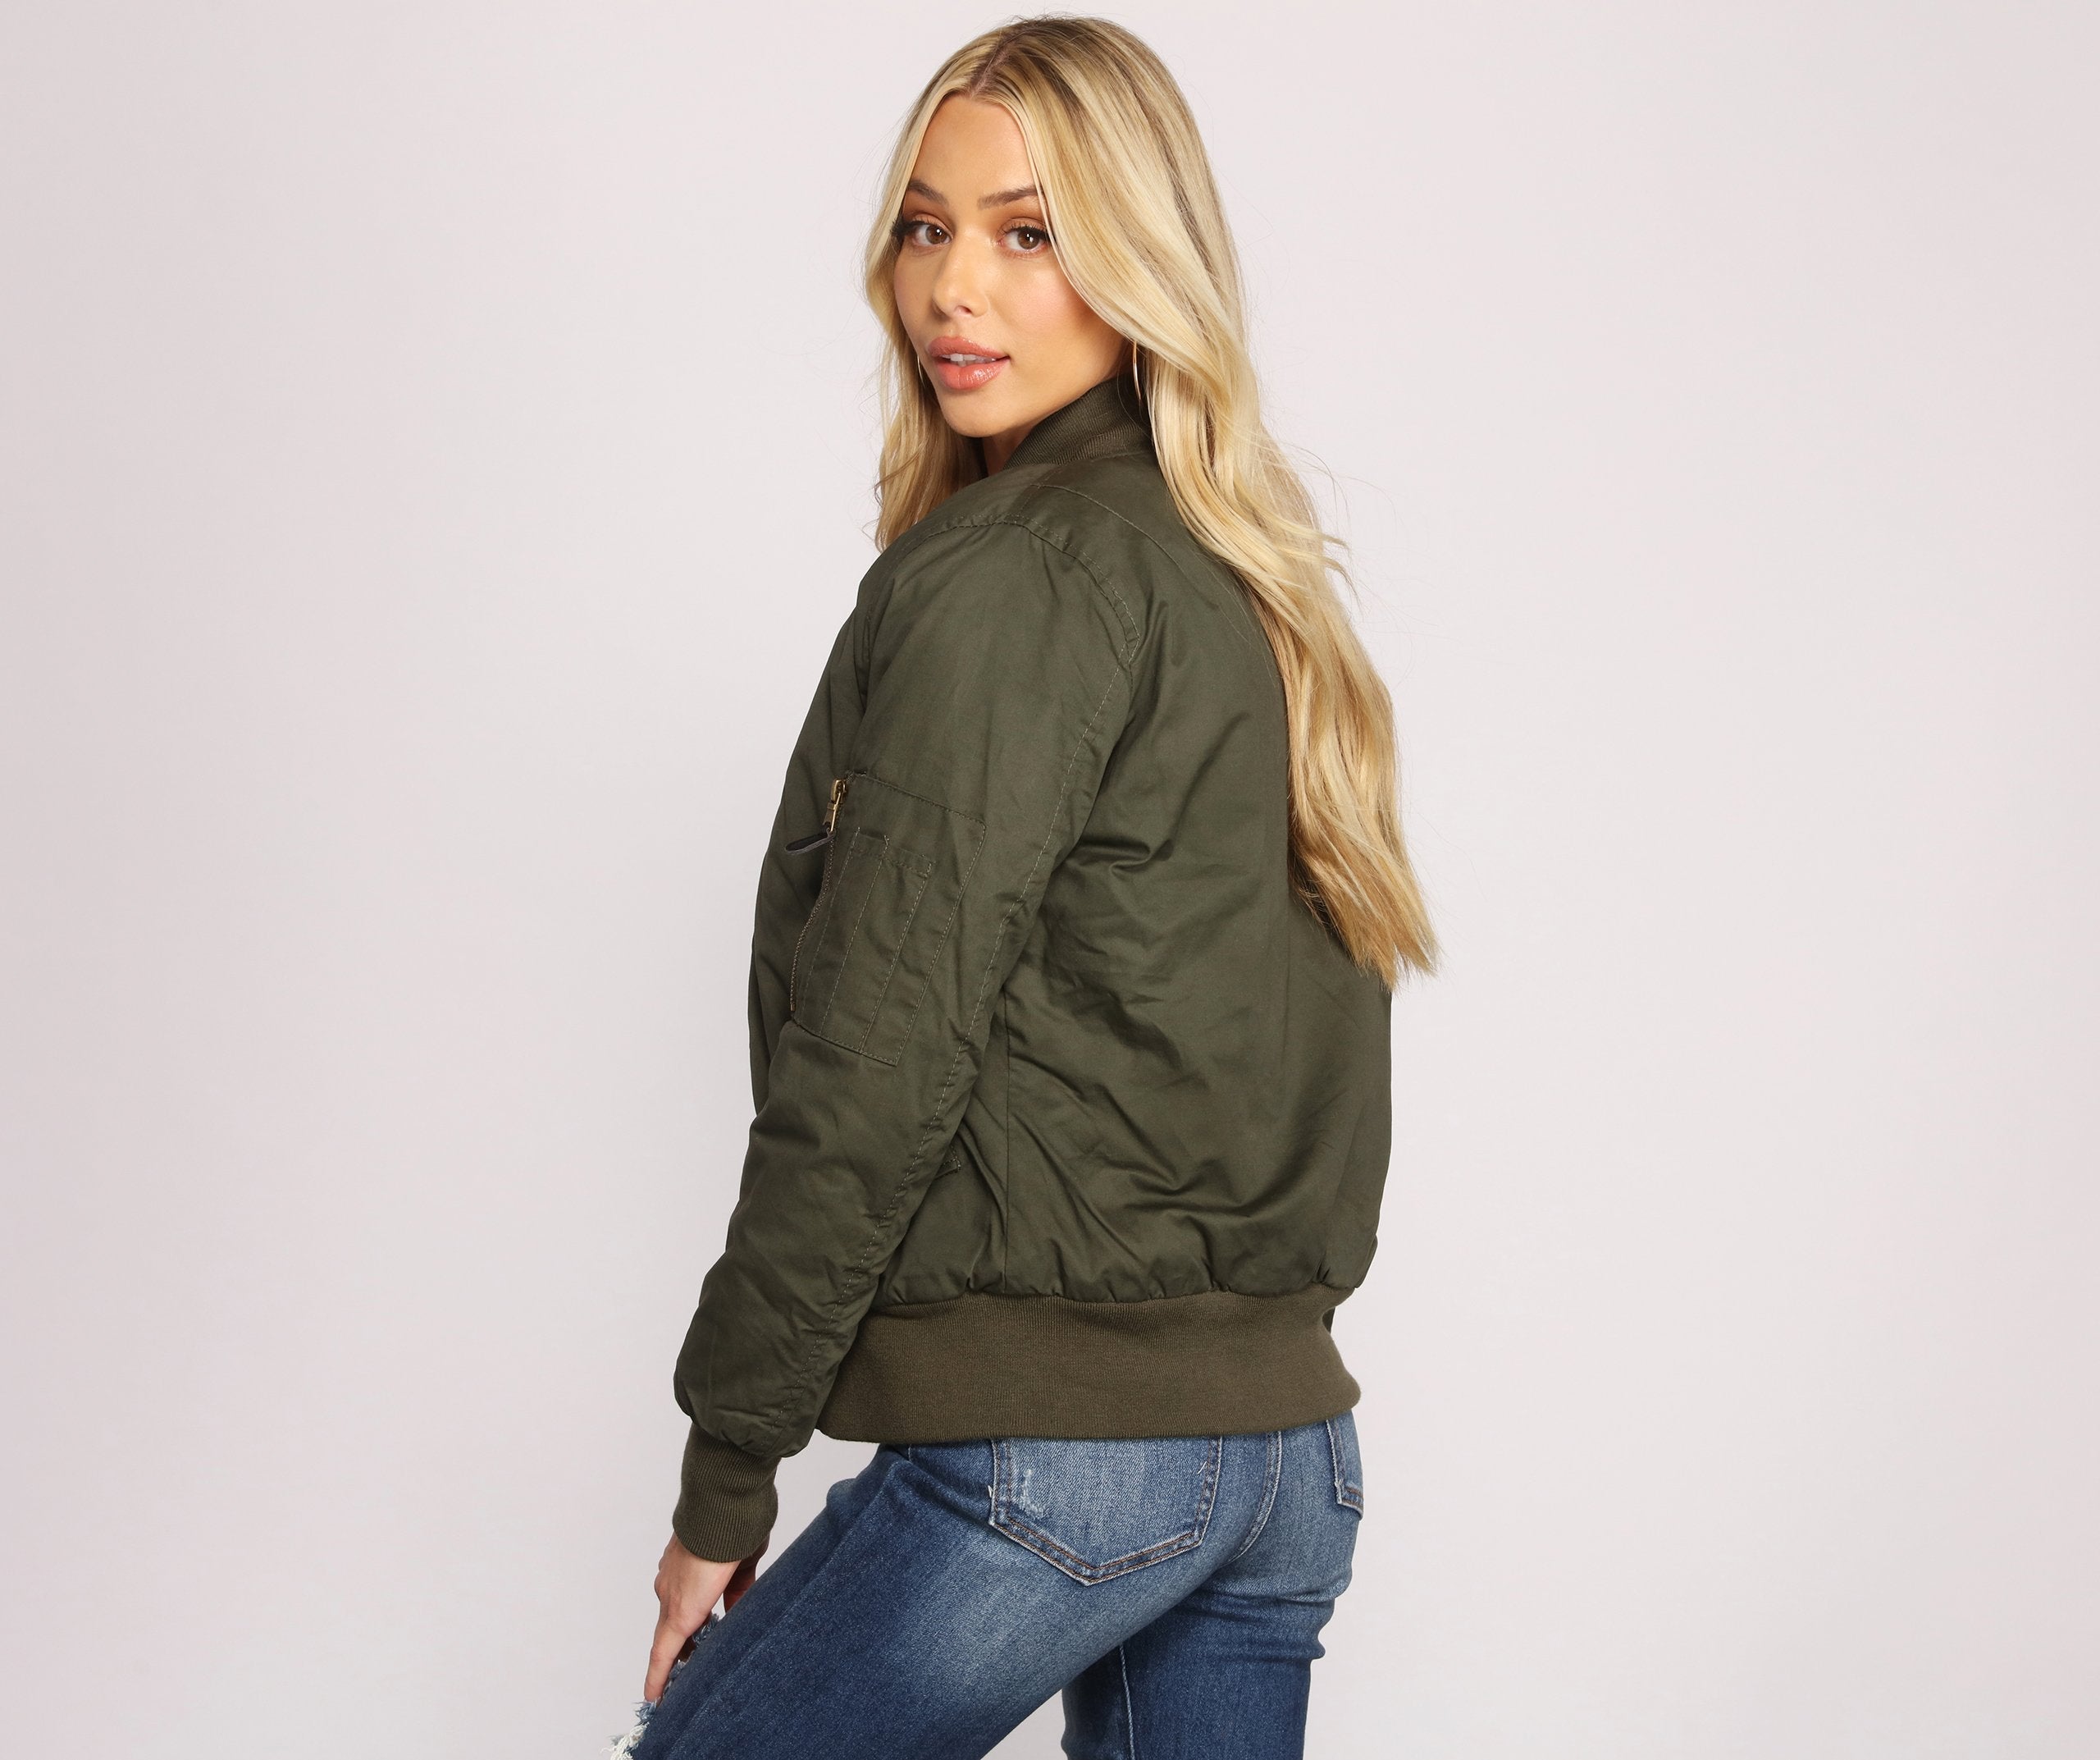 Edgy Chic Bomber Jacket – Lady Occasions